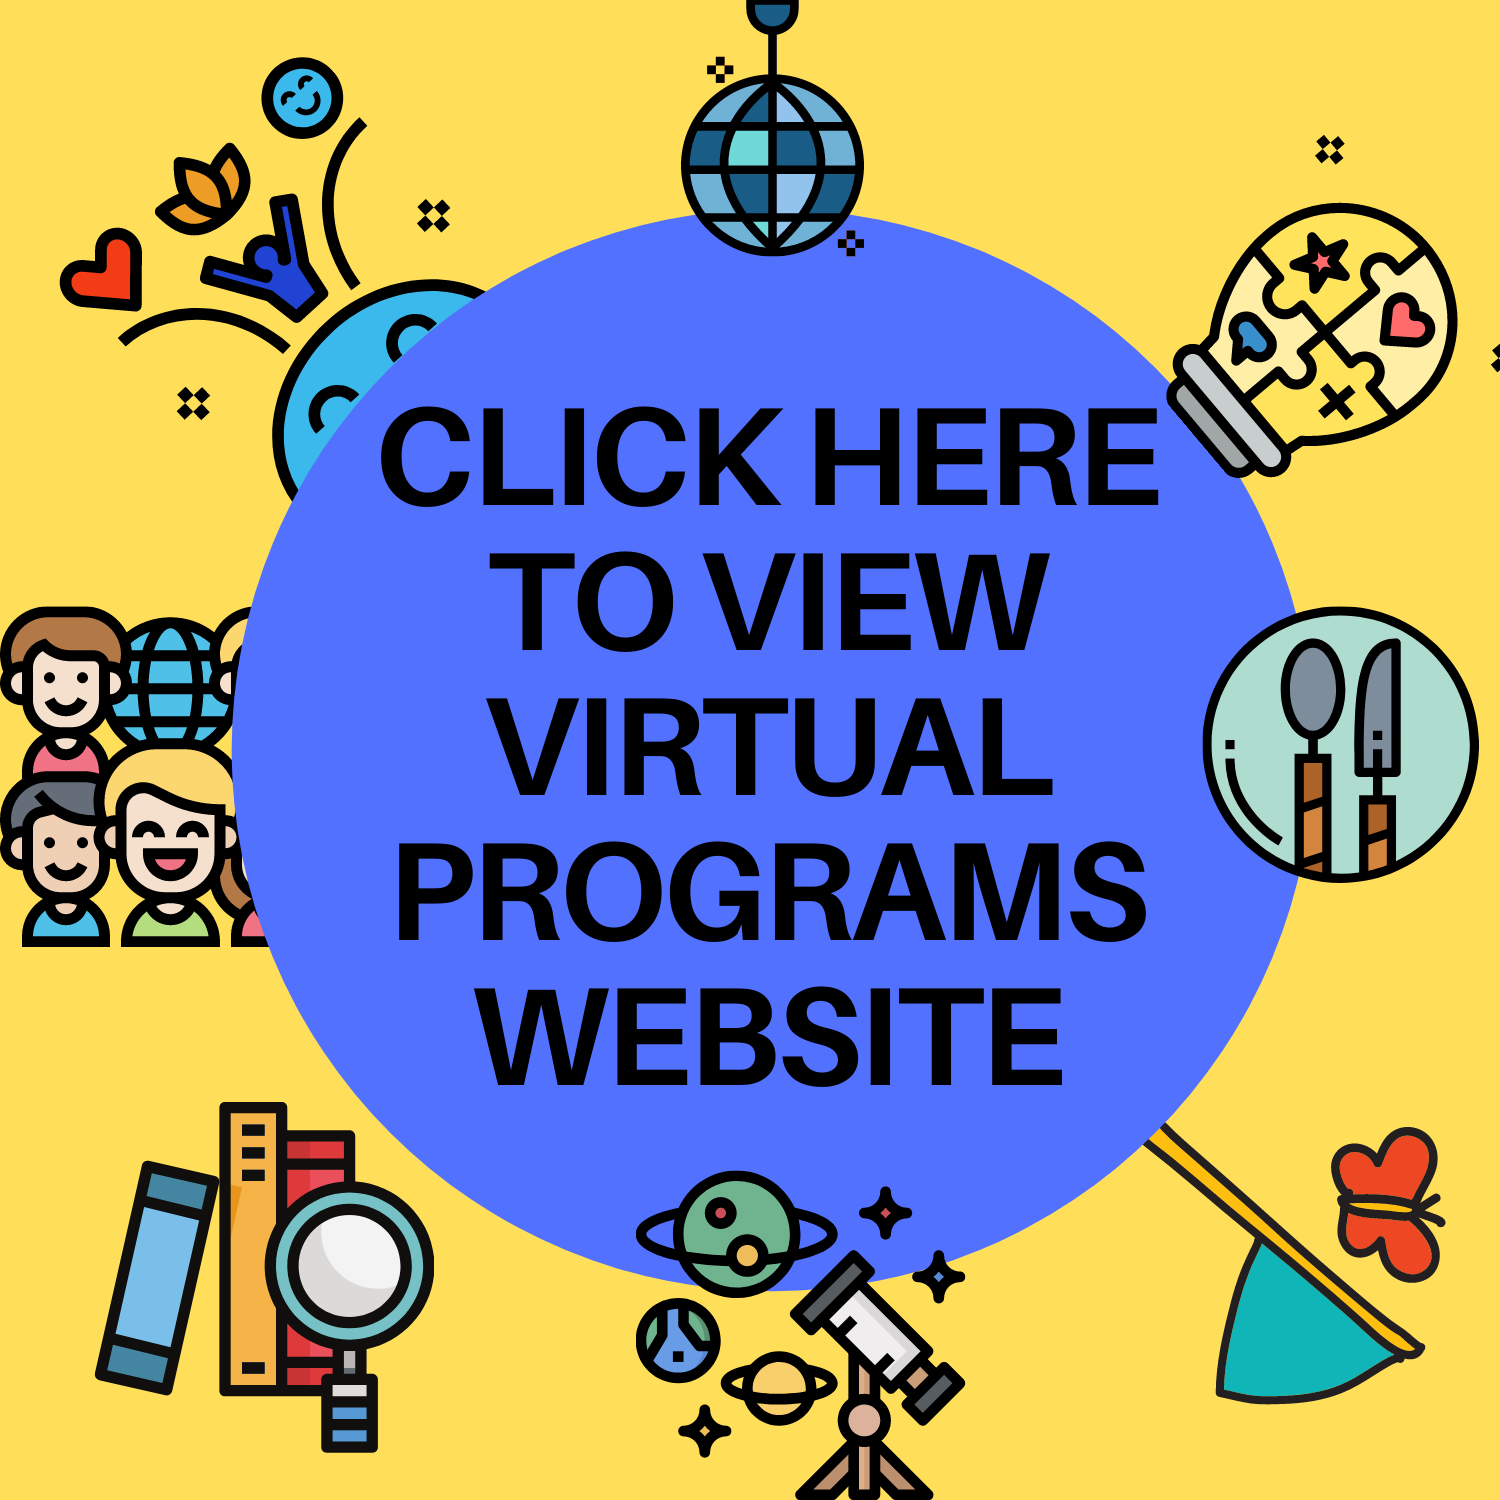 click HERE TO VIEW VIRTUAL PROGRAMS